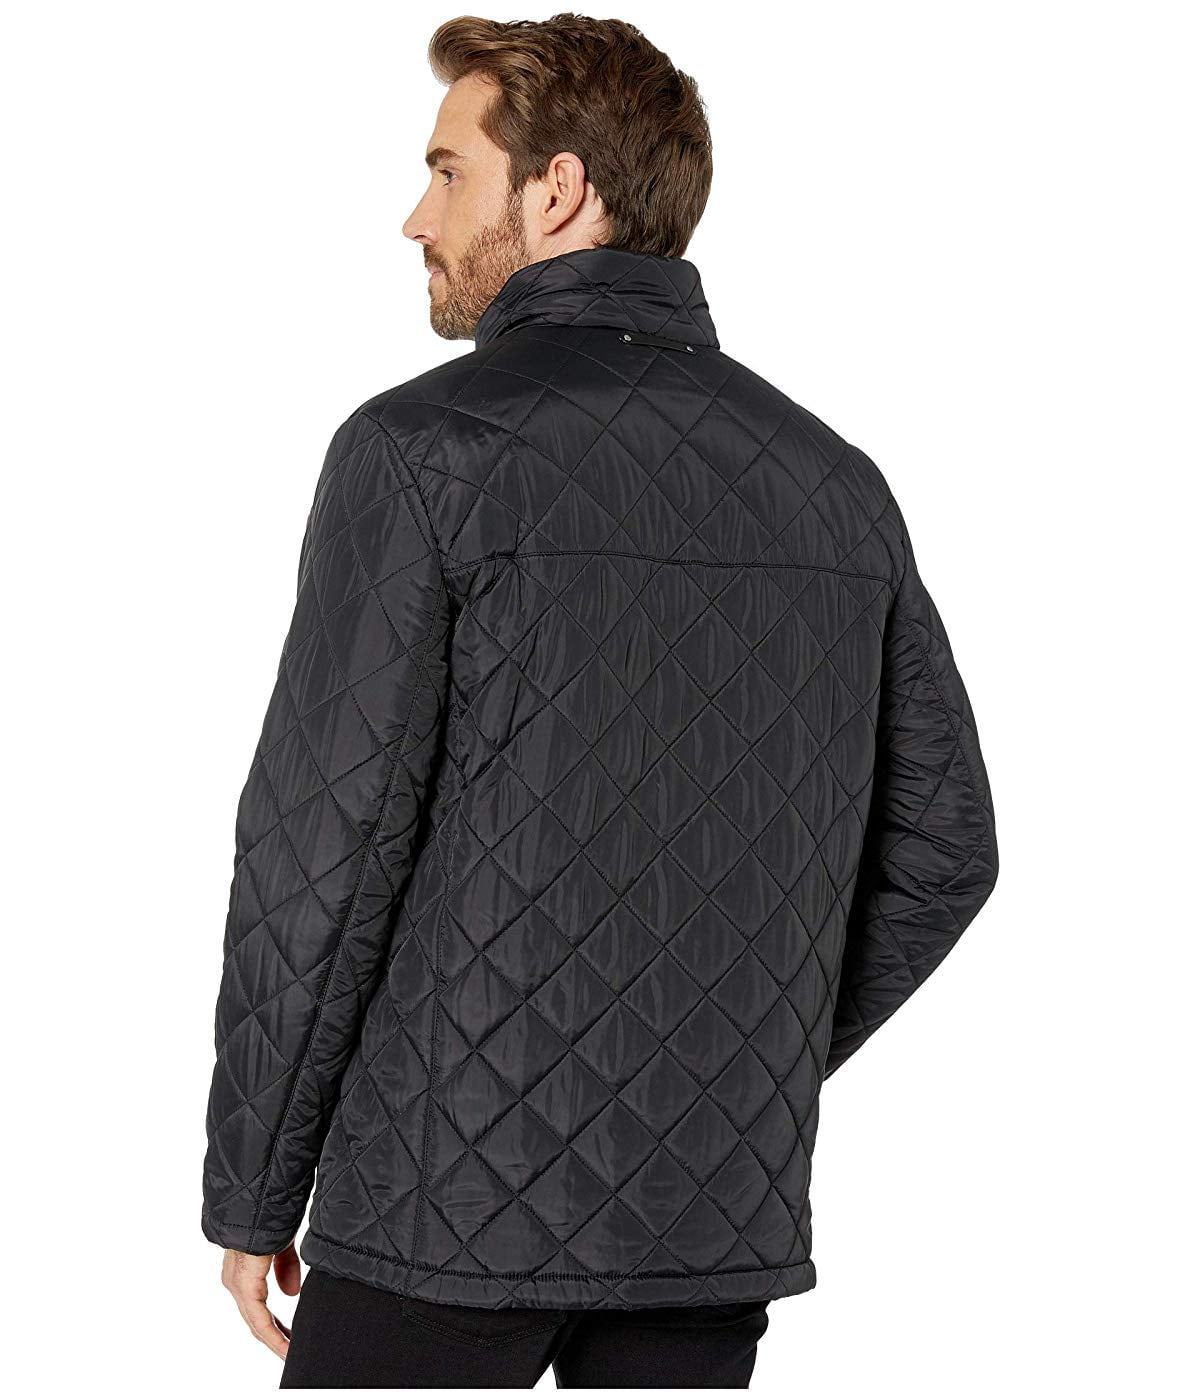 Cole Haan Mens Quilted Jacket with Light Weight Bib